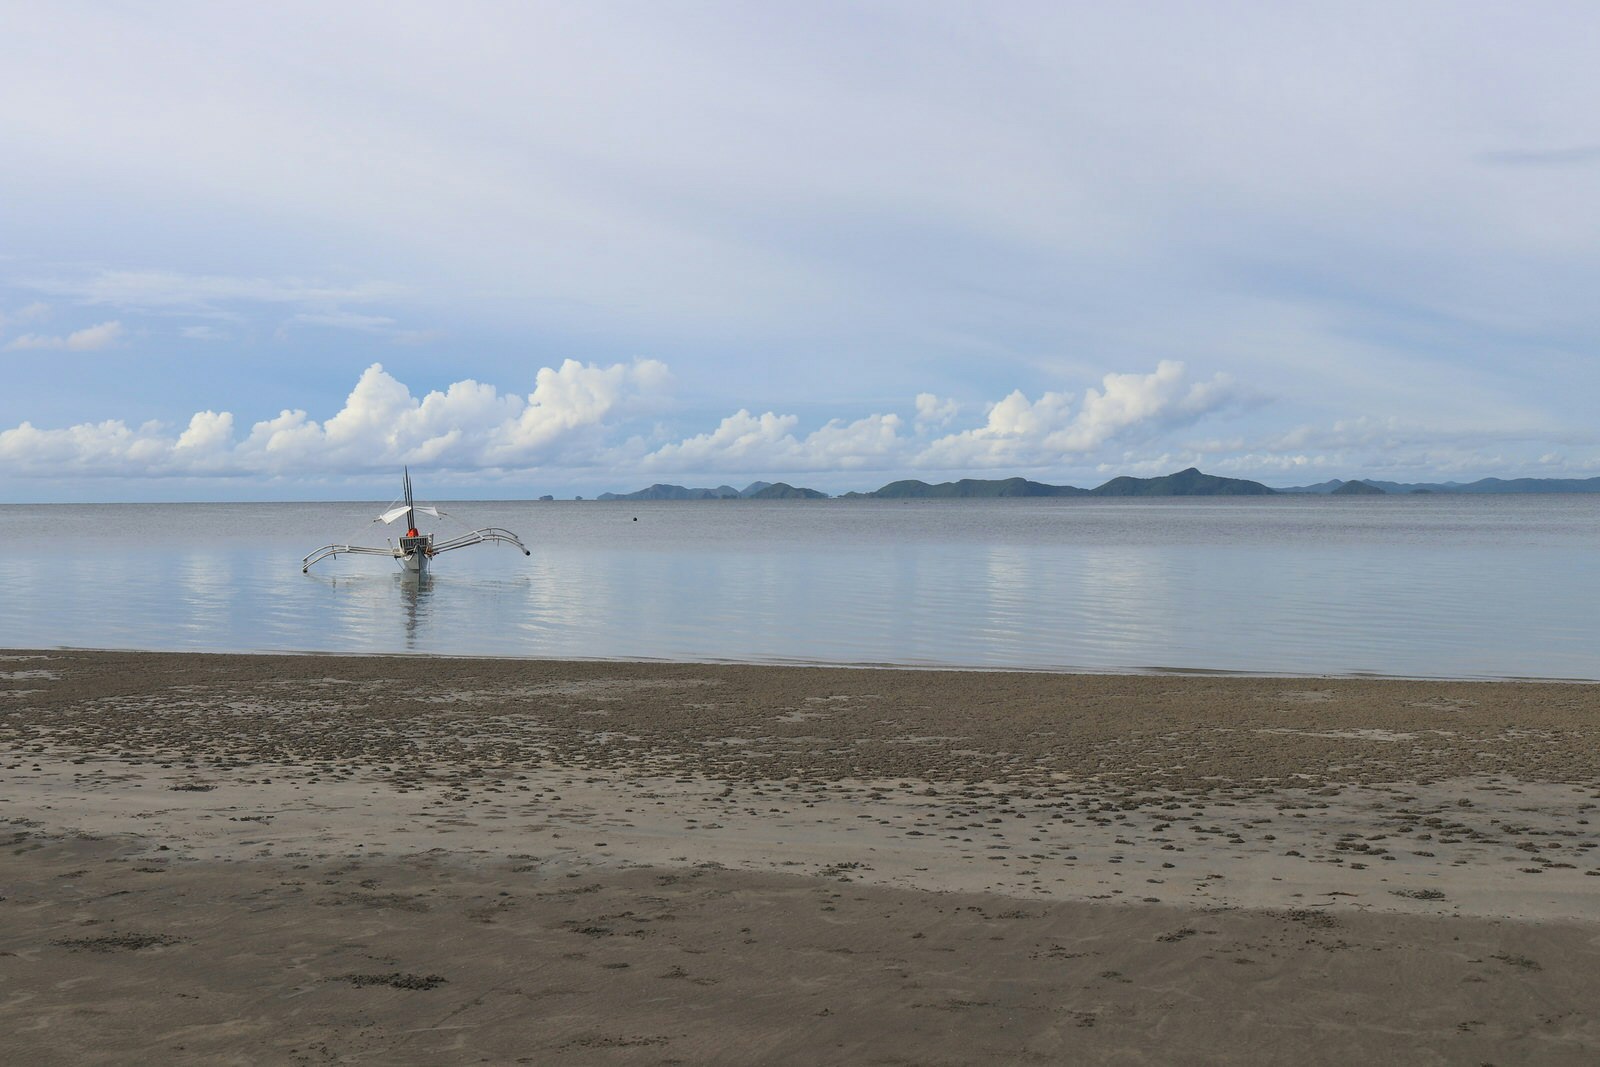 The islands of Linapacan are visible from the shore of a sandy beach on a sunny day